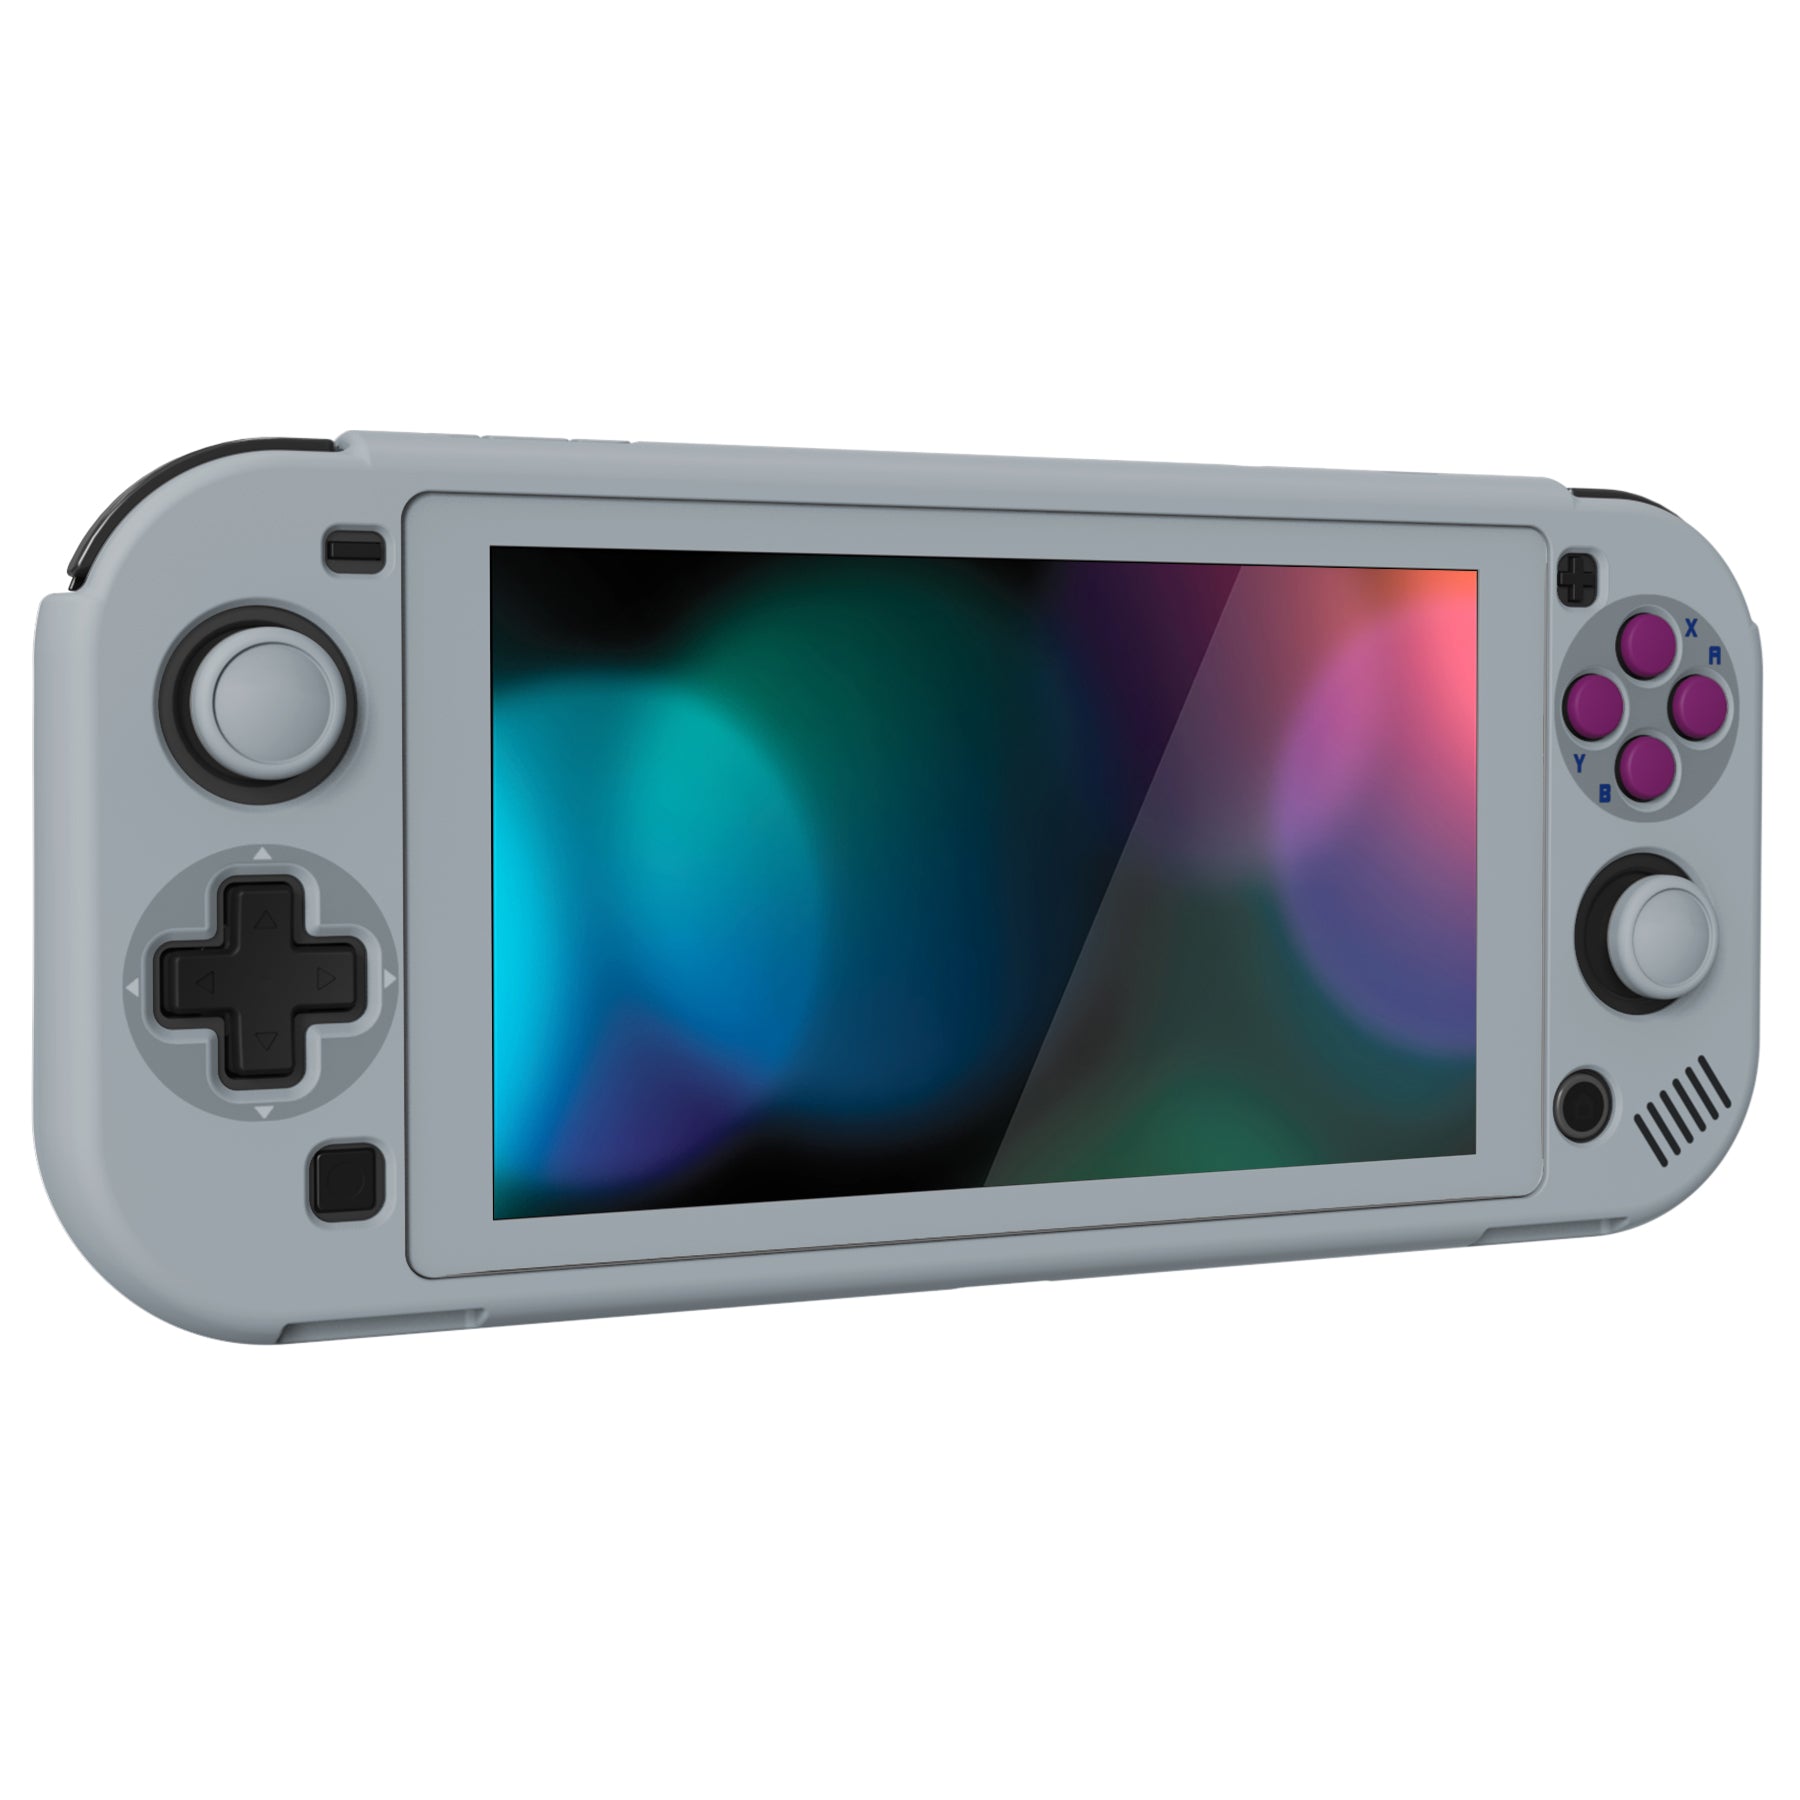 PlayVital ZealProtect Protective Case for Nintendo Switch Lite, Hard S –  playvital